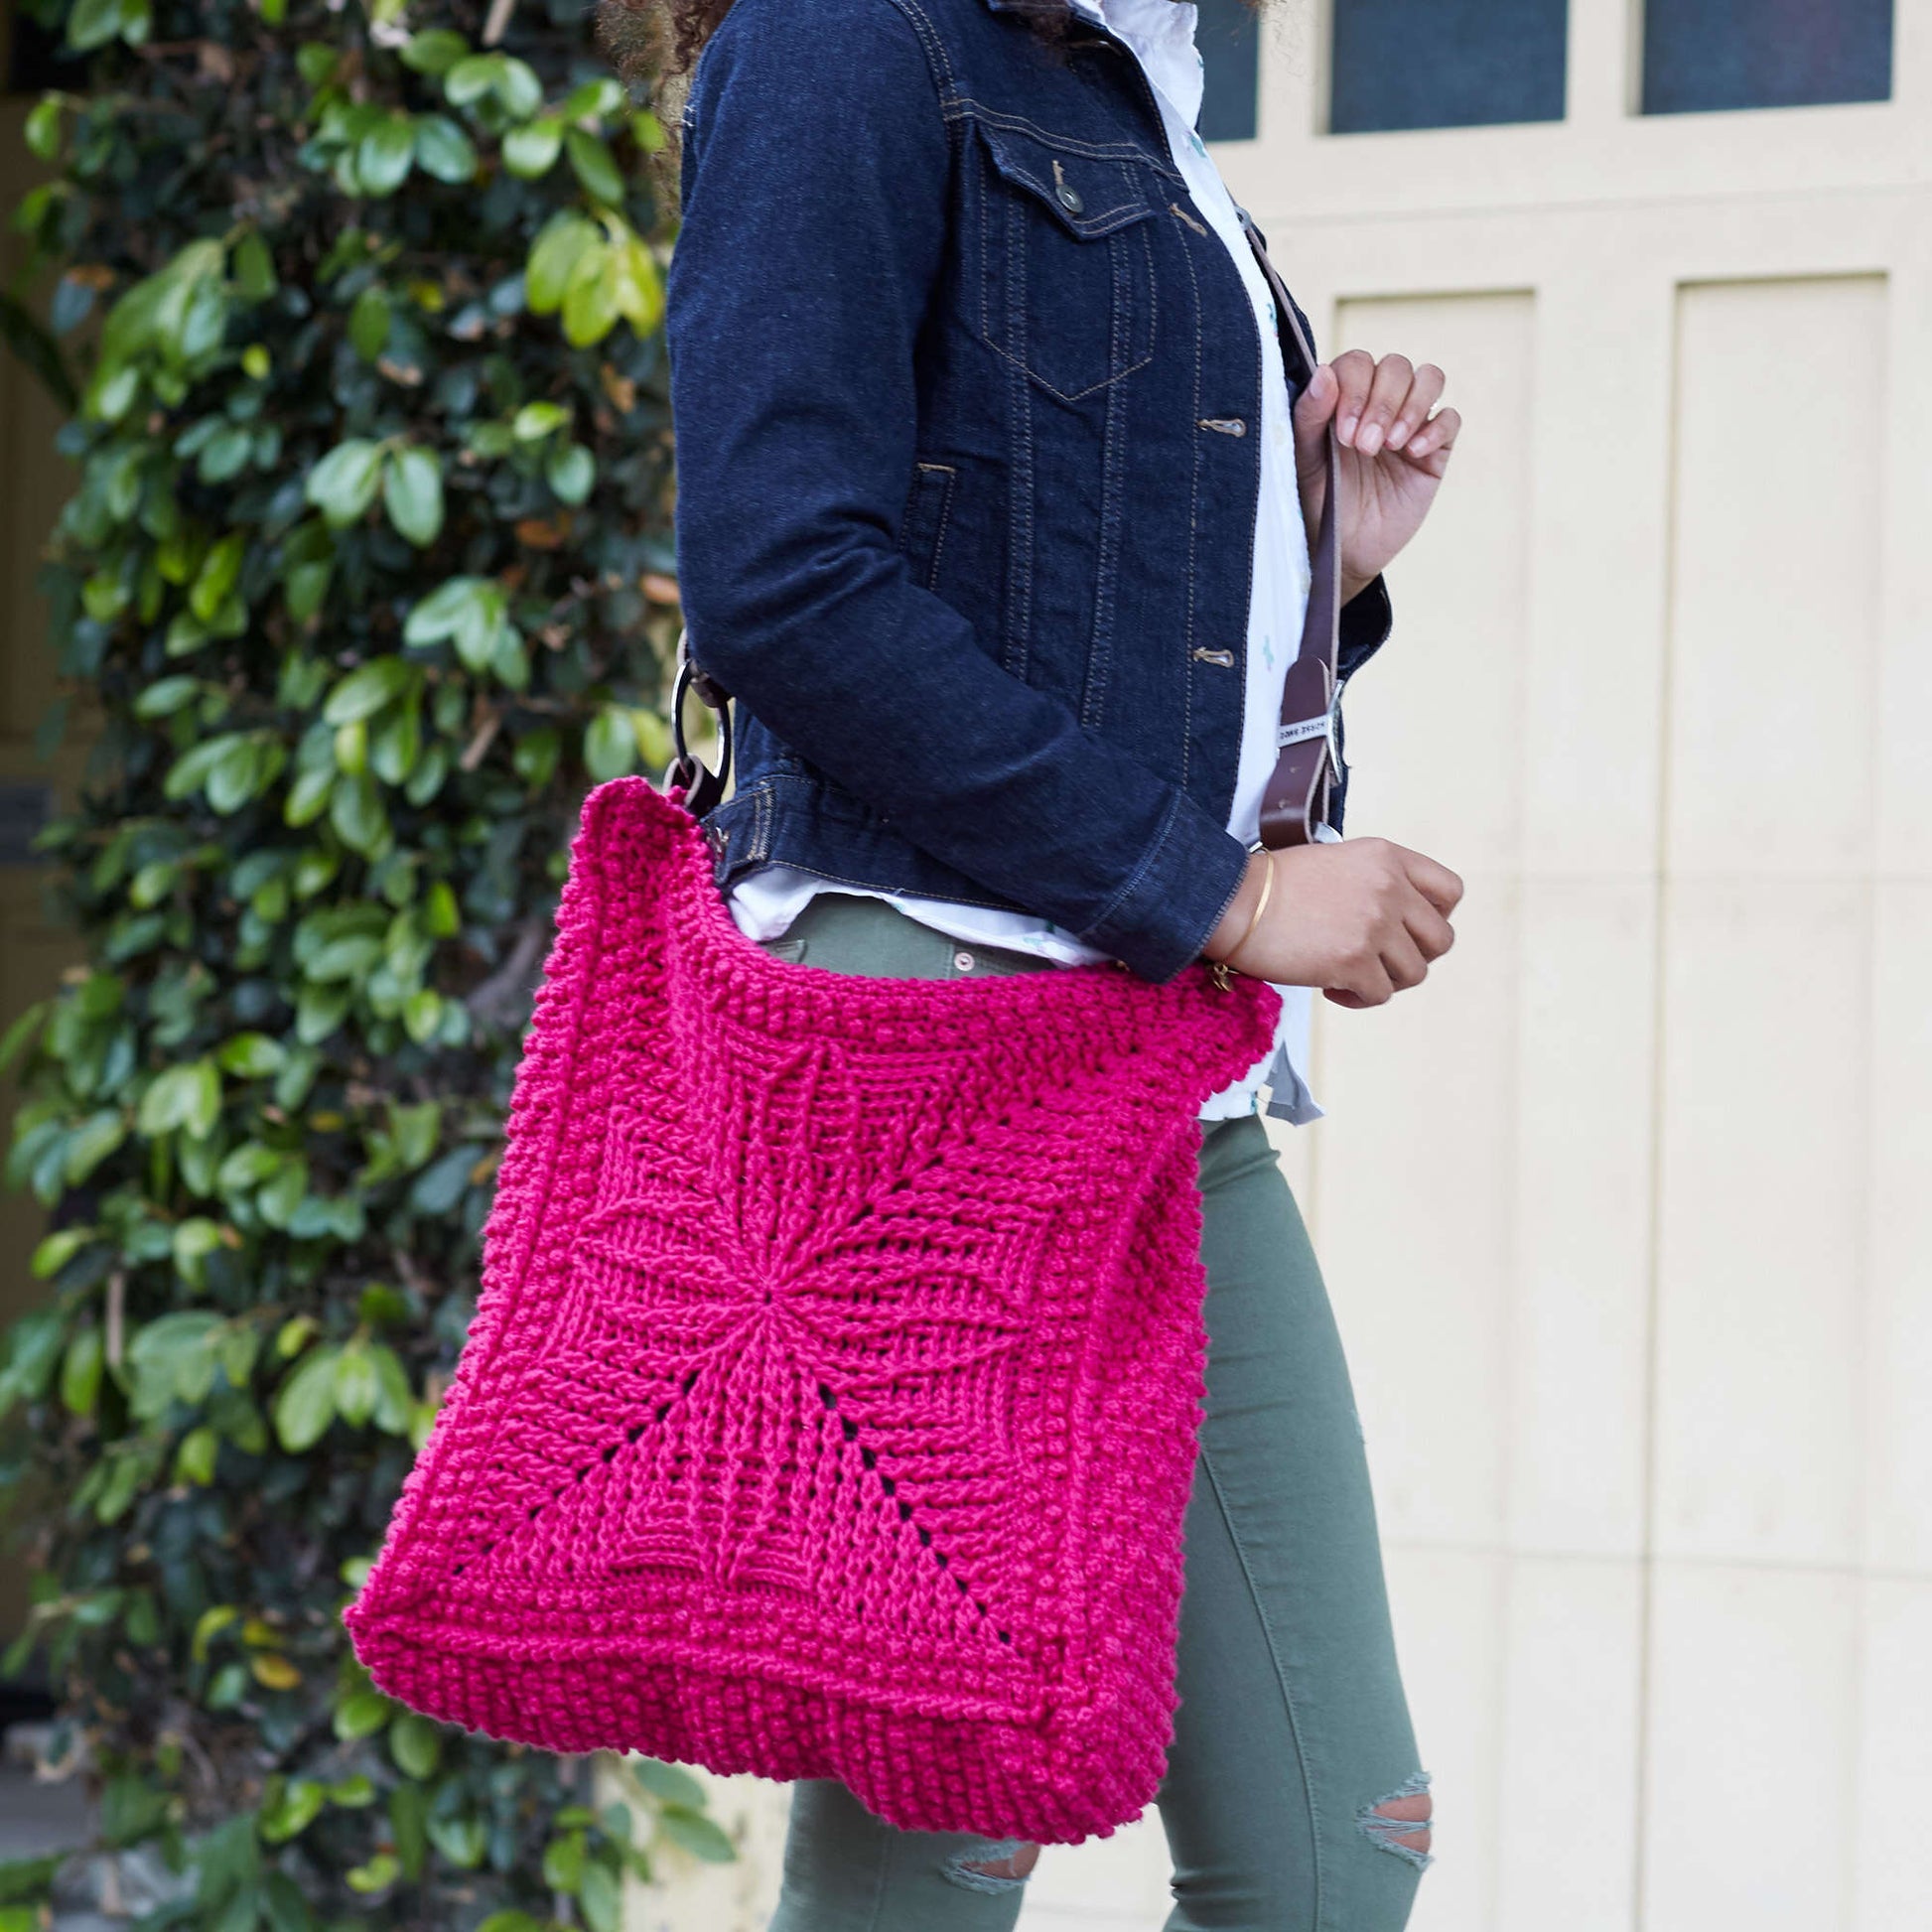 Free Red Heart Chic Carry-all Bag Pattern